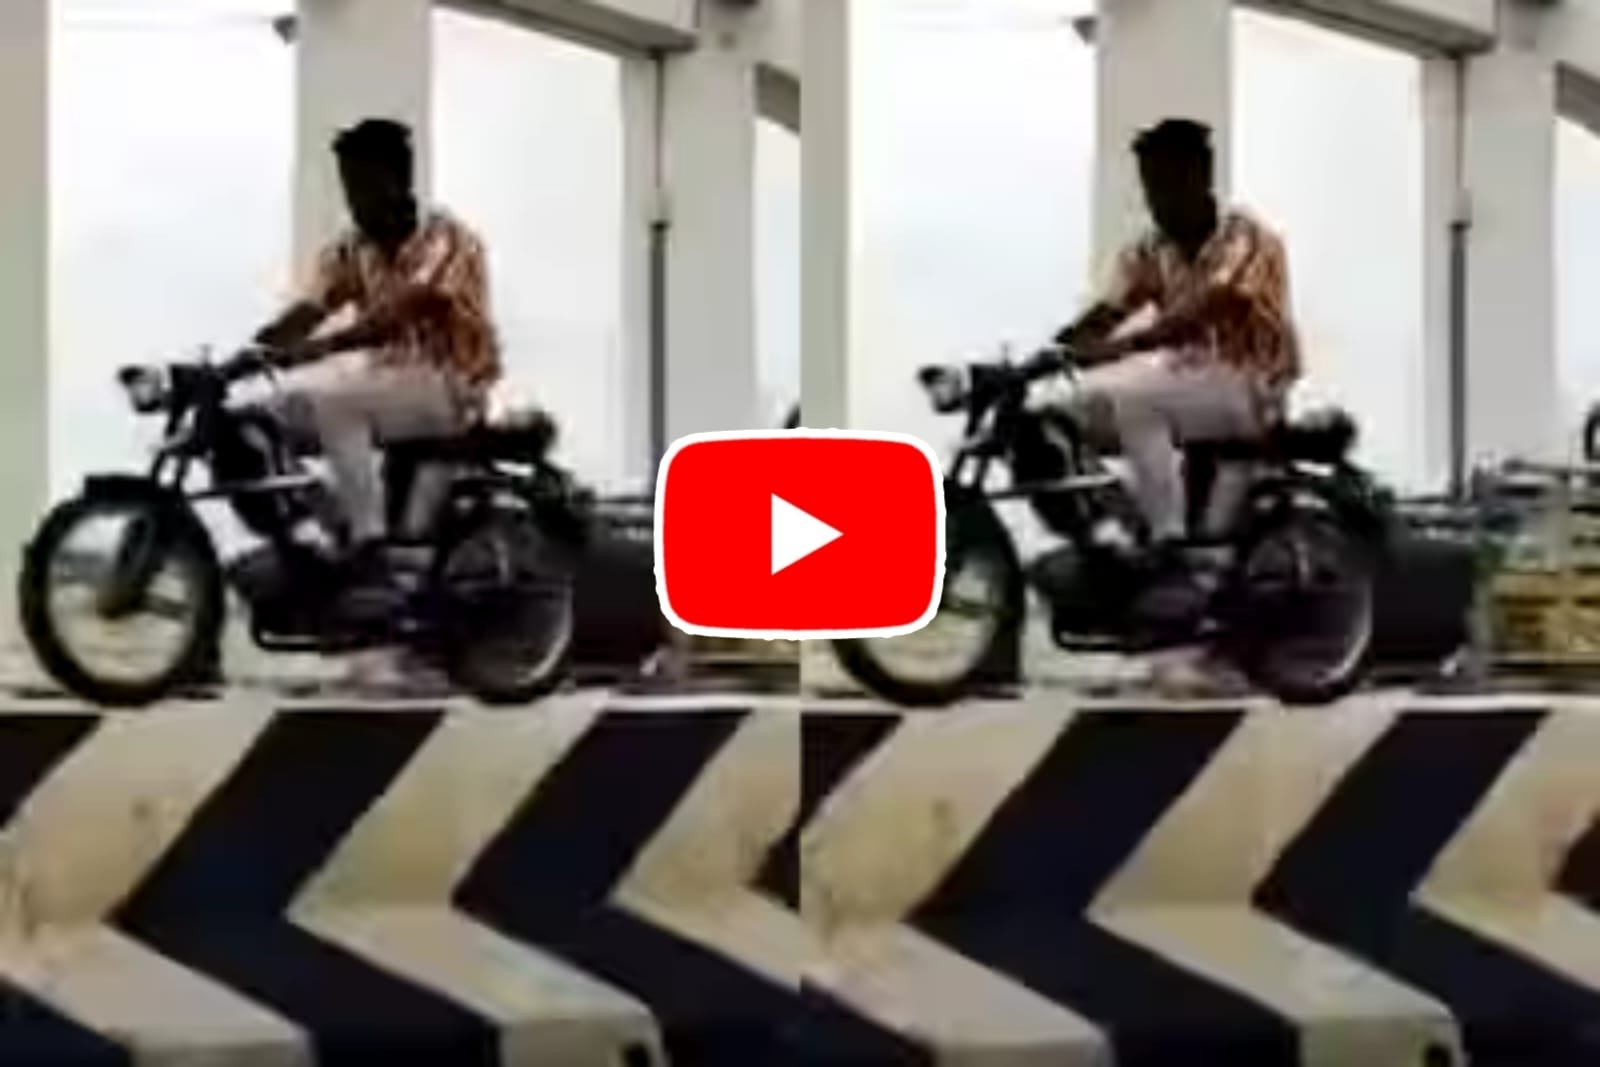 Stunt Ka Video: This is the real danger player started riding the bike on the divider.